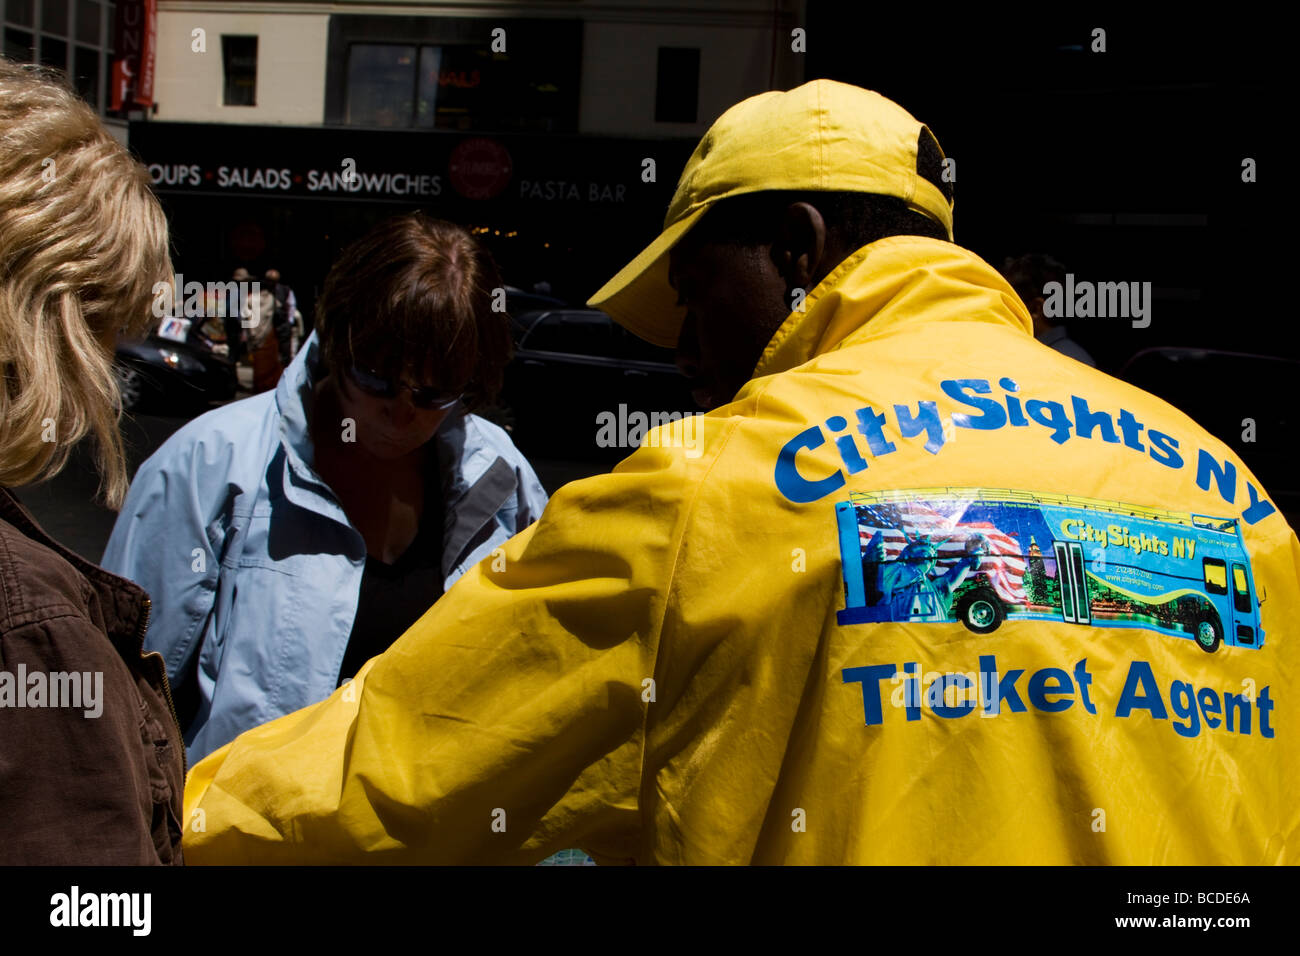 Man selling tickets for City Sights bus tours in New York City, USA Stock Photo